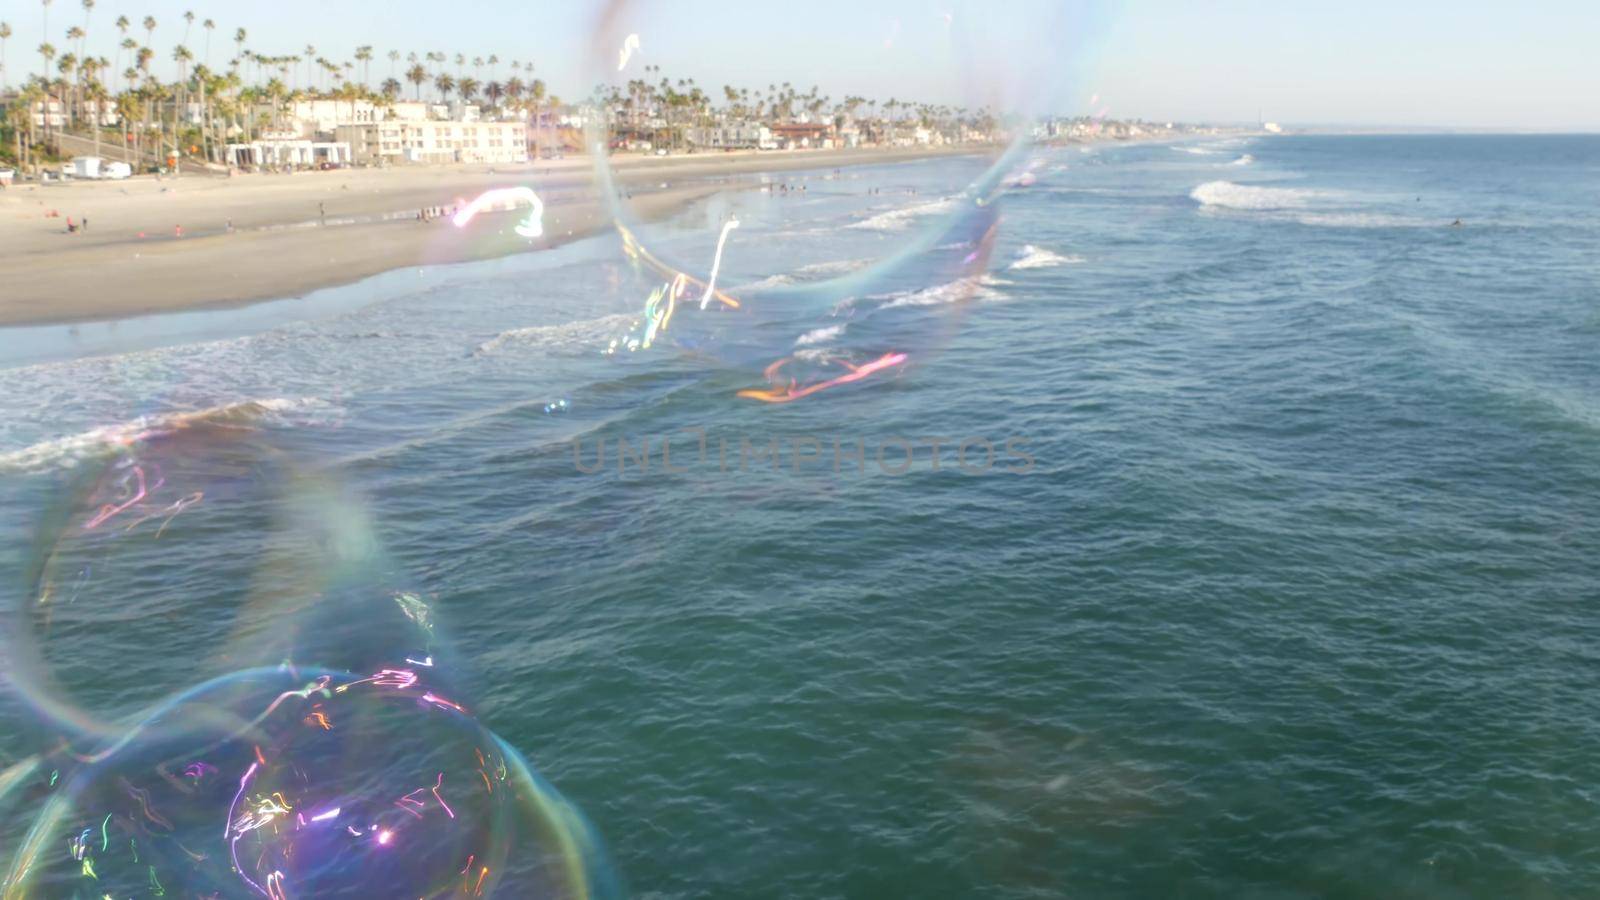 Soap bubbles on pier in California, blurred summertime seamless looped background. Creative romantic metaphor, concept of dreaming, happiness and magic. Abstract symbol of childhood, fantasy, freedom by DogoraSun